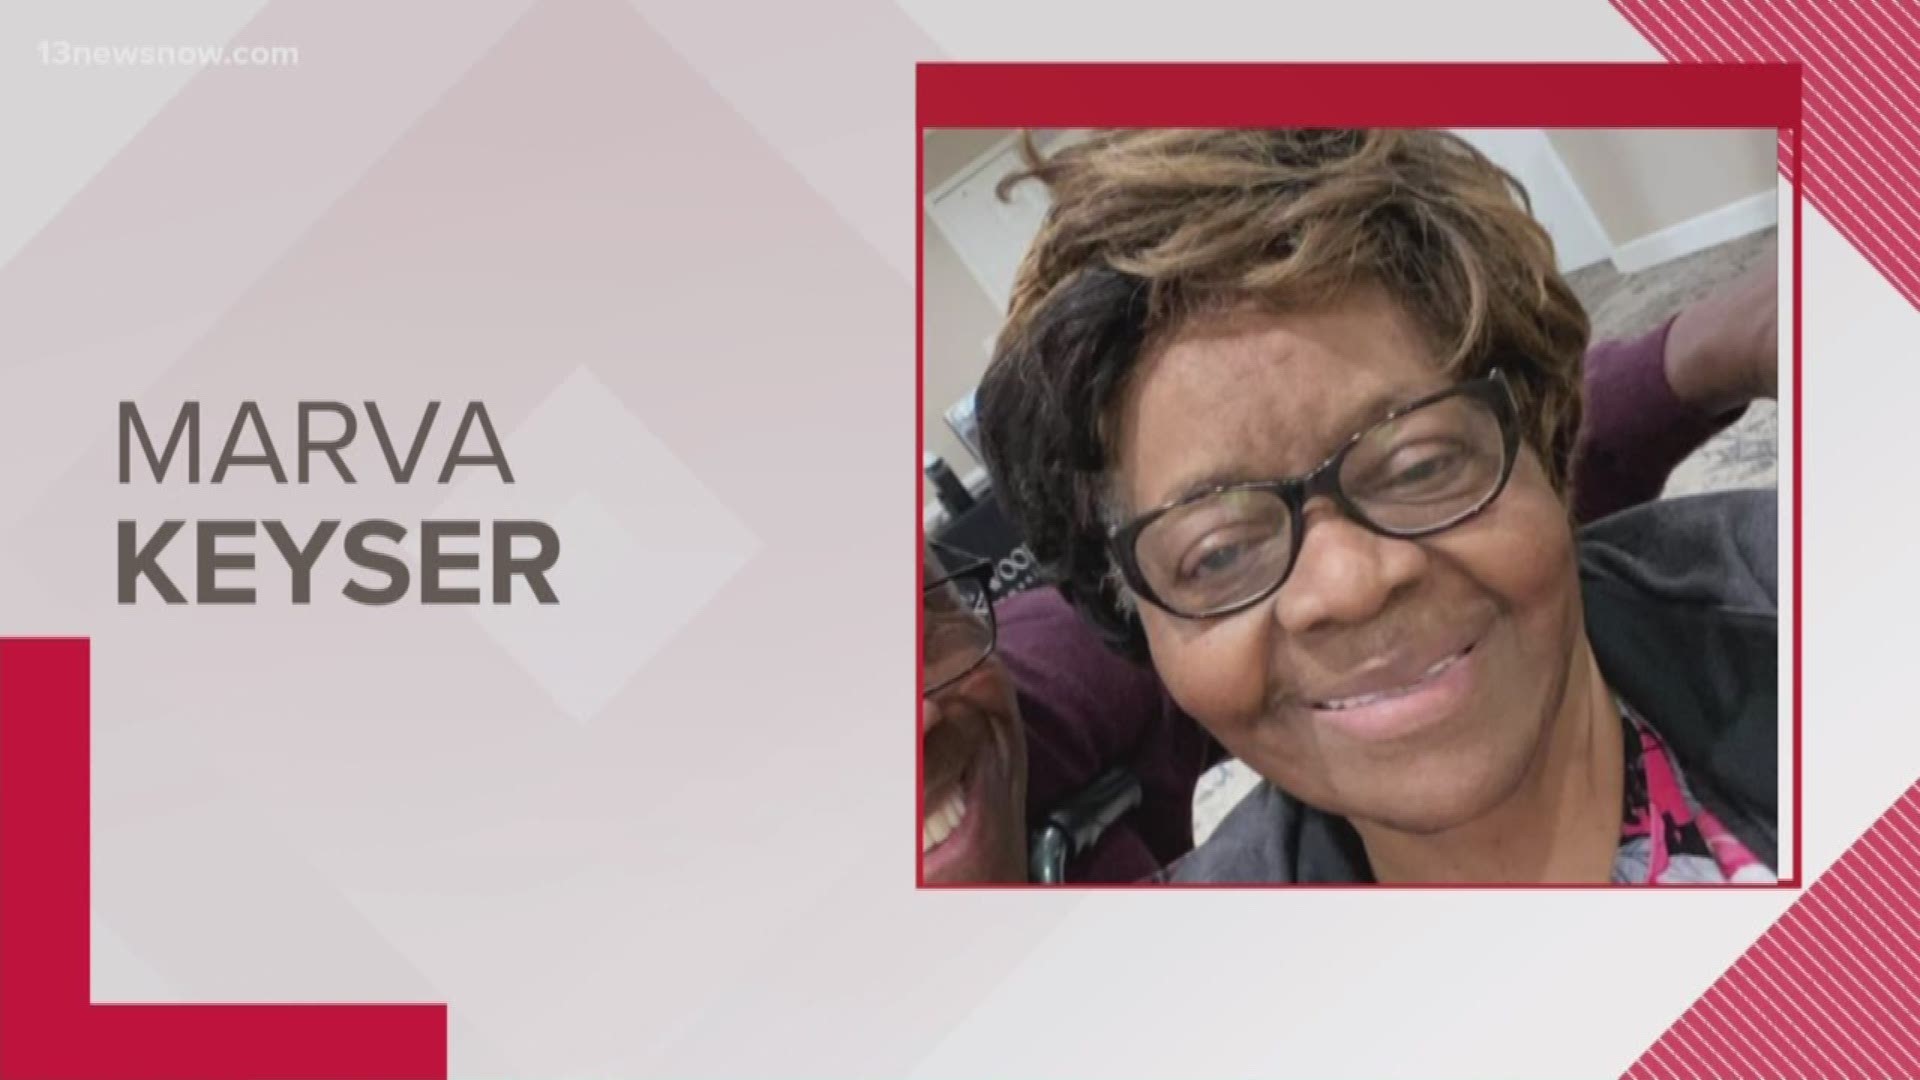 Marva Keyser was last seen near a retirement community in Newport News. The 77-year-old is considered endangered.